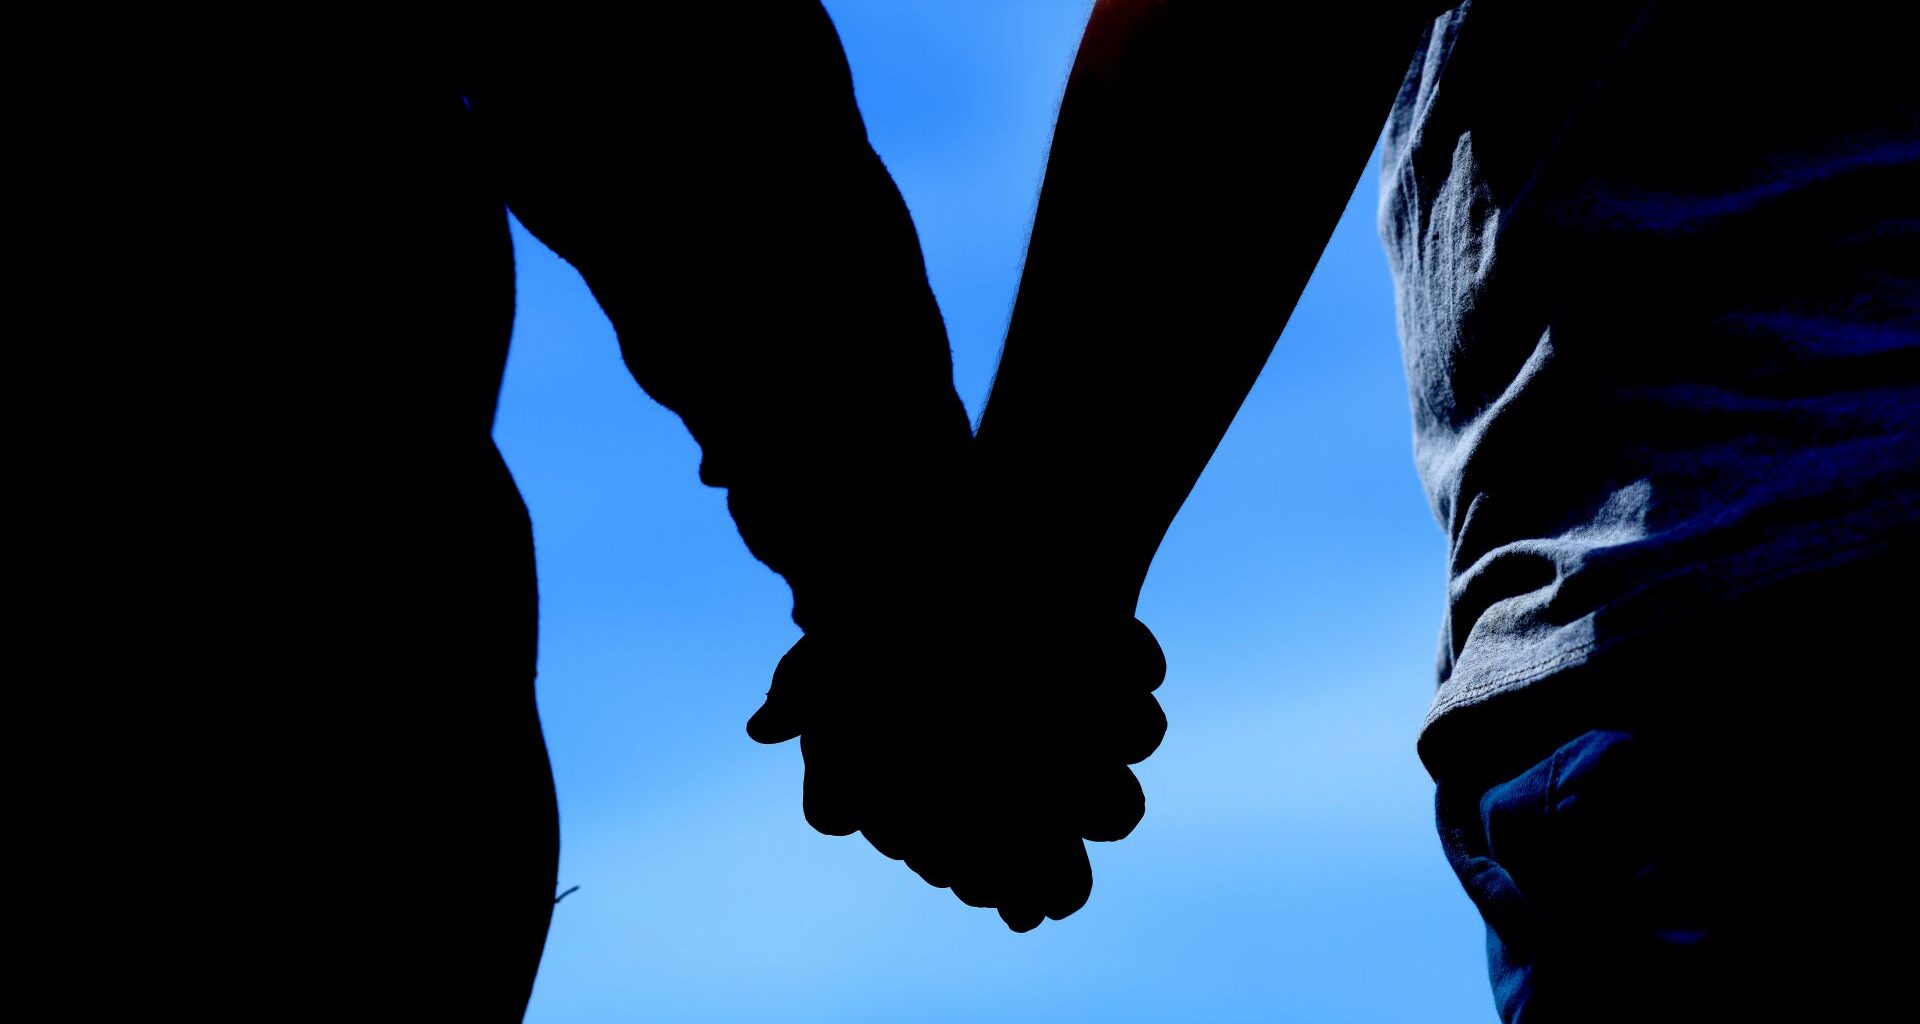 A silhouette image of two individuals holding hands